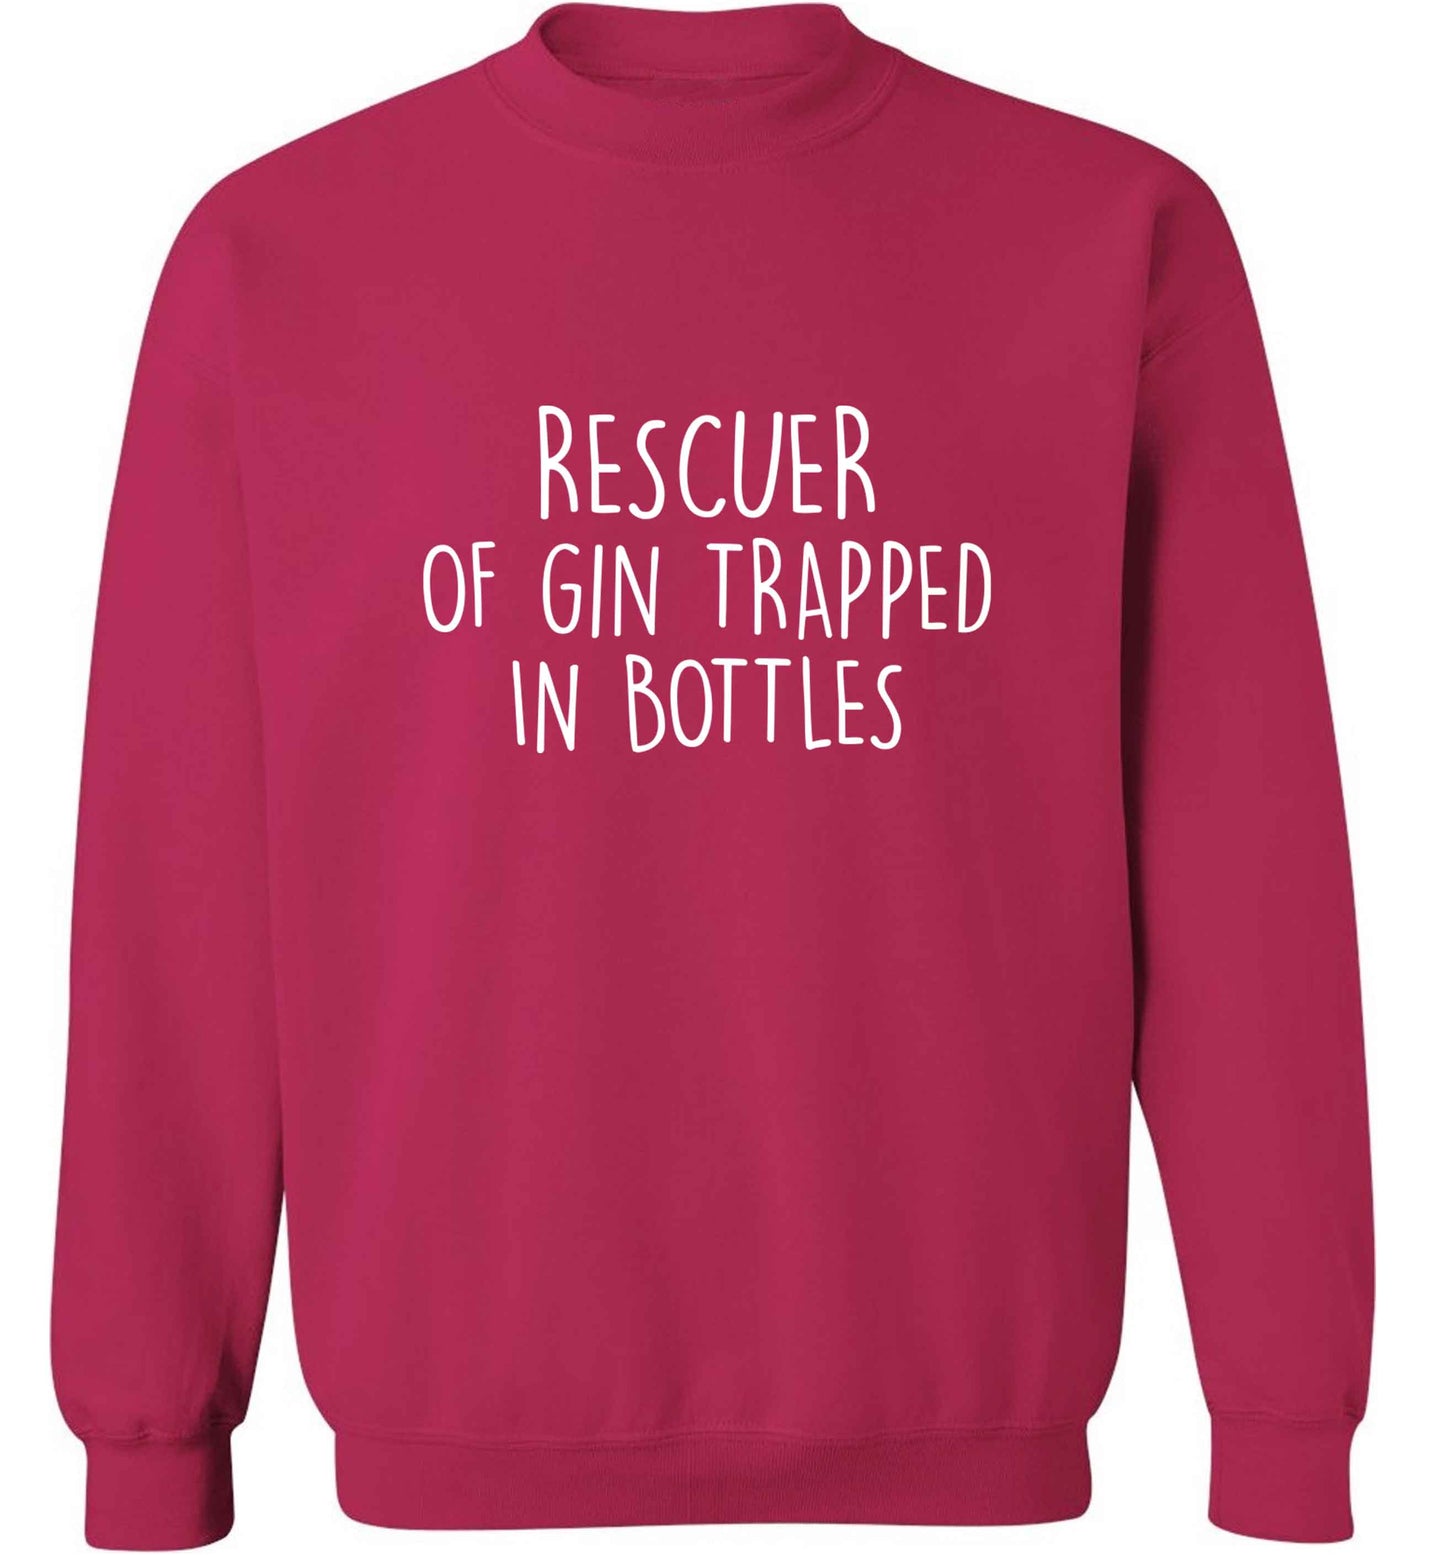 Rescuer of gin trapped in bottles adult's unisex pink sweater 2XL